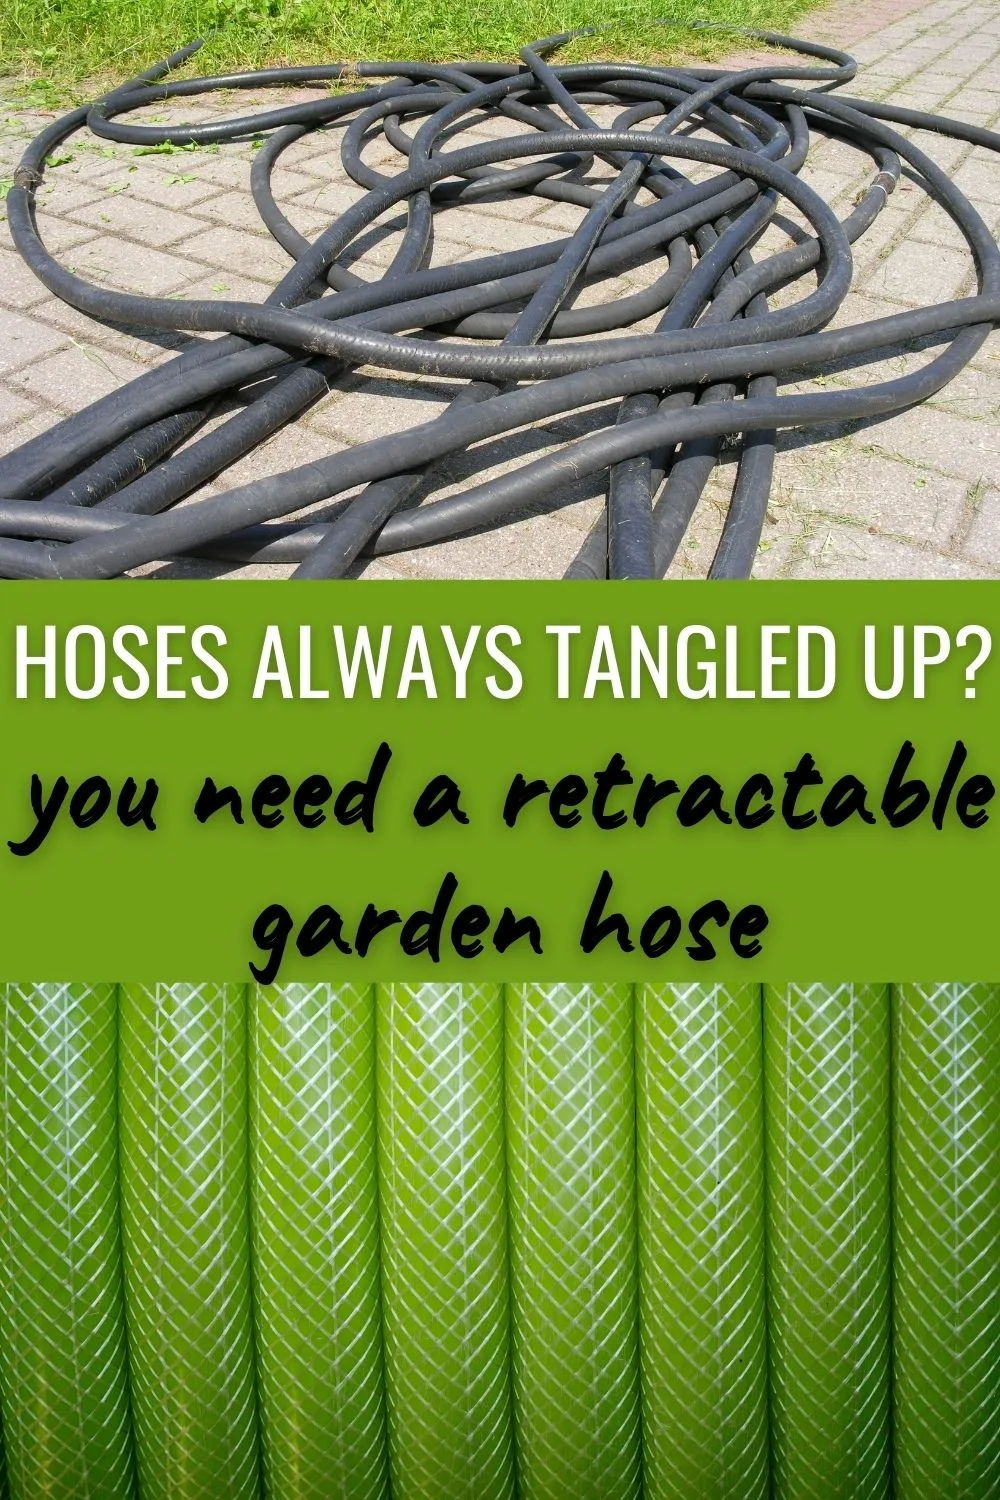 Hoses always tangled up? You need a retractable garden hose